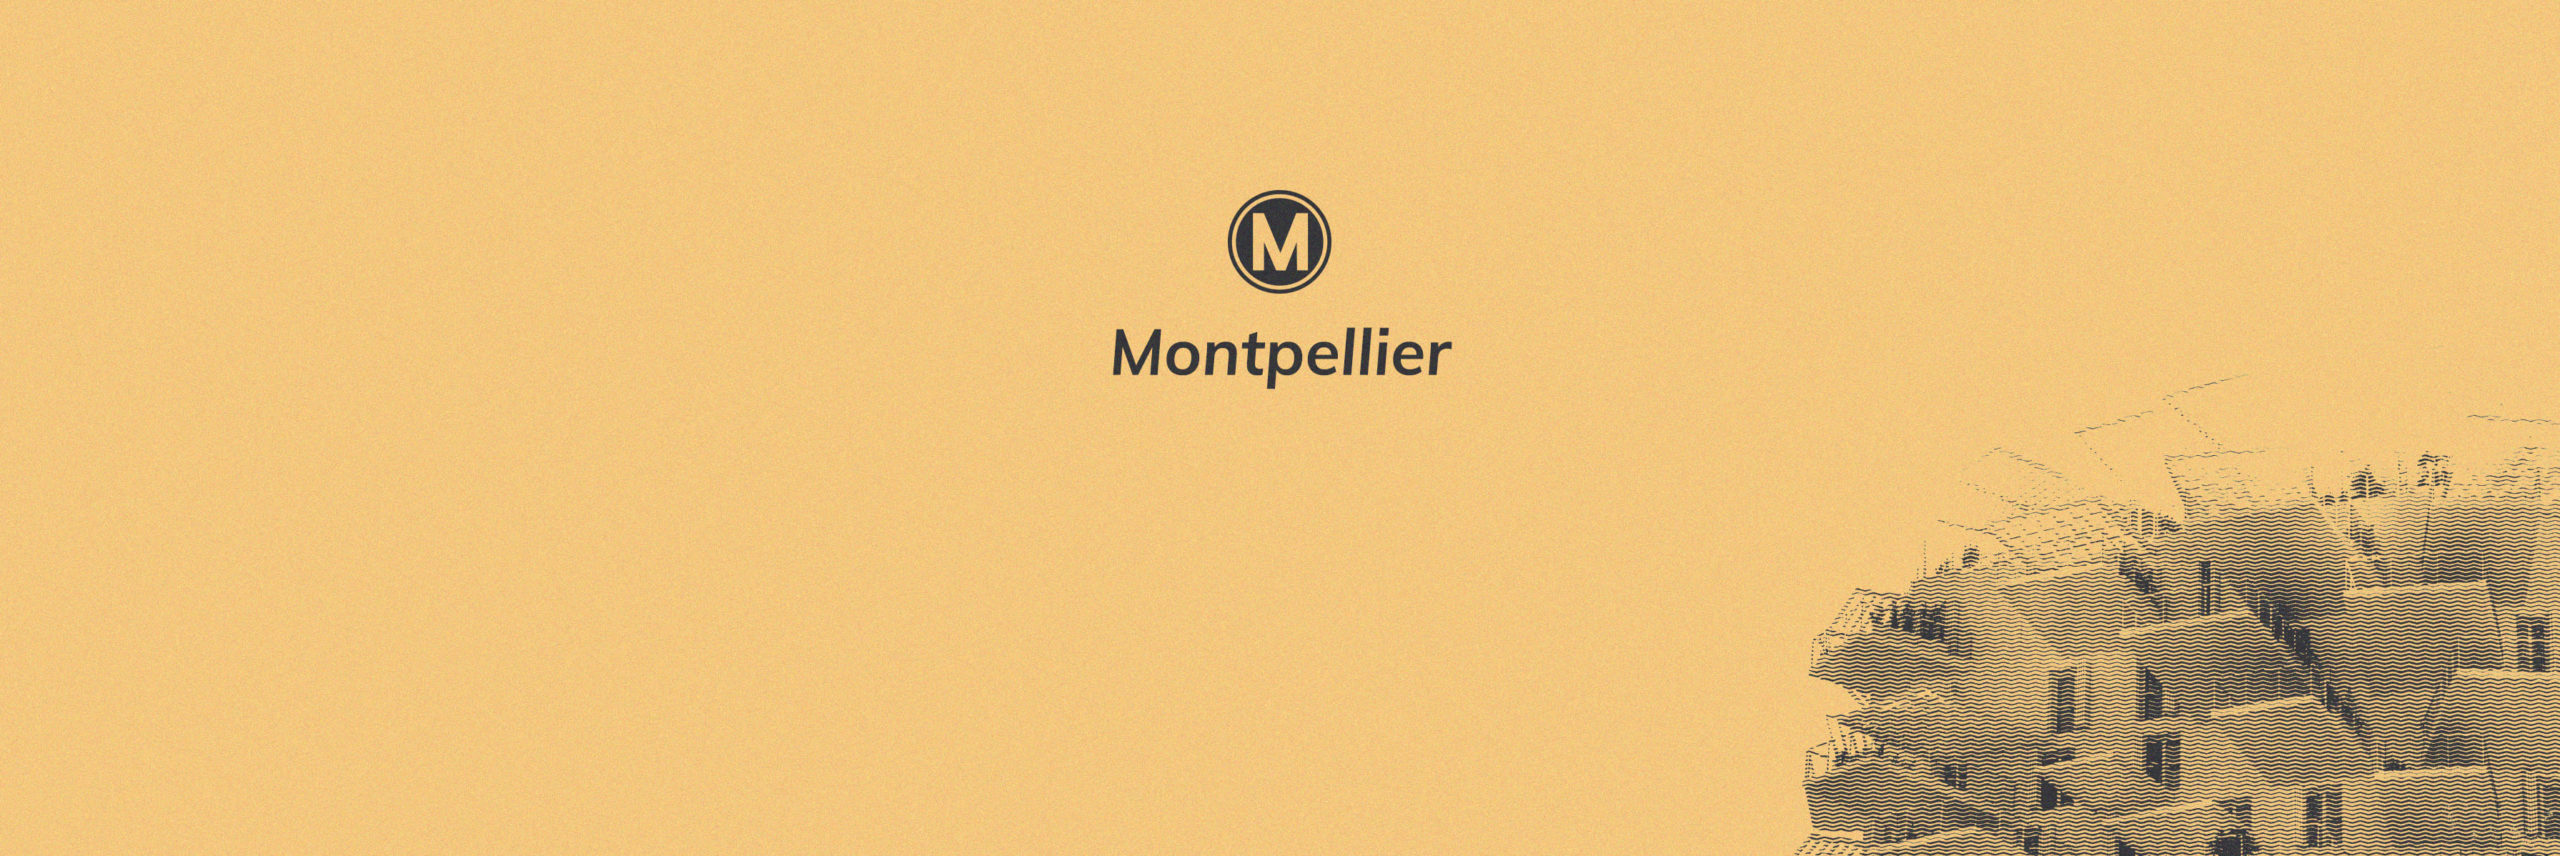 M comme Montpellier